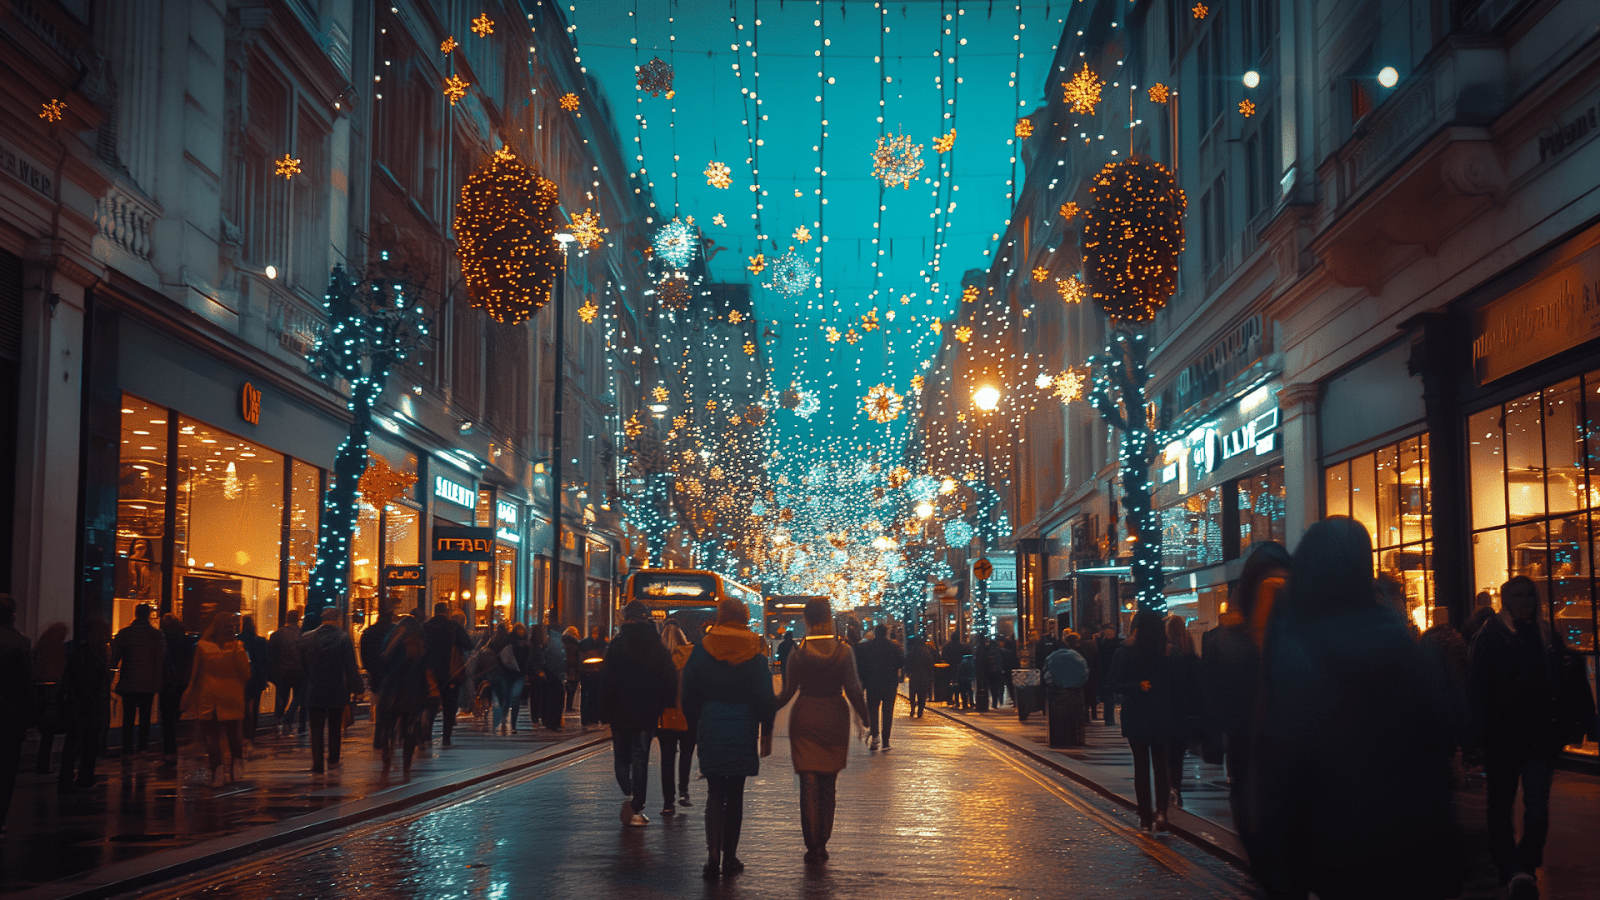 Bustling Oxford Street illuminated with festive Christmas lights during winter.